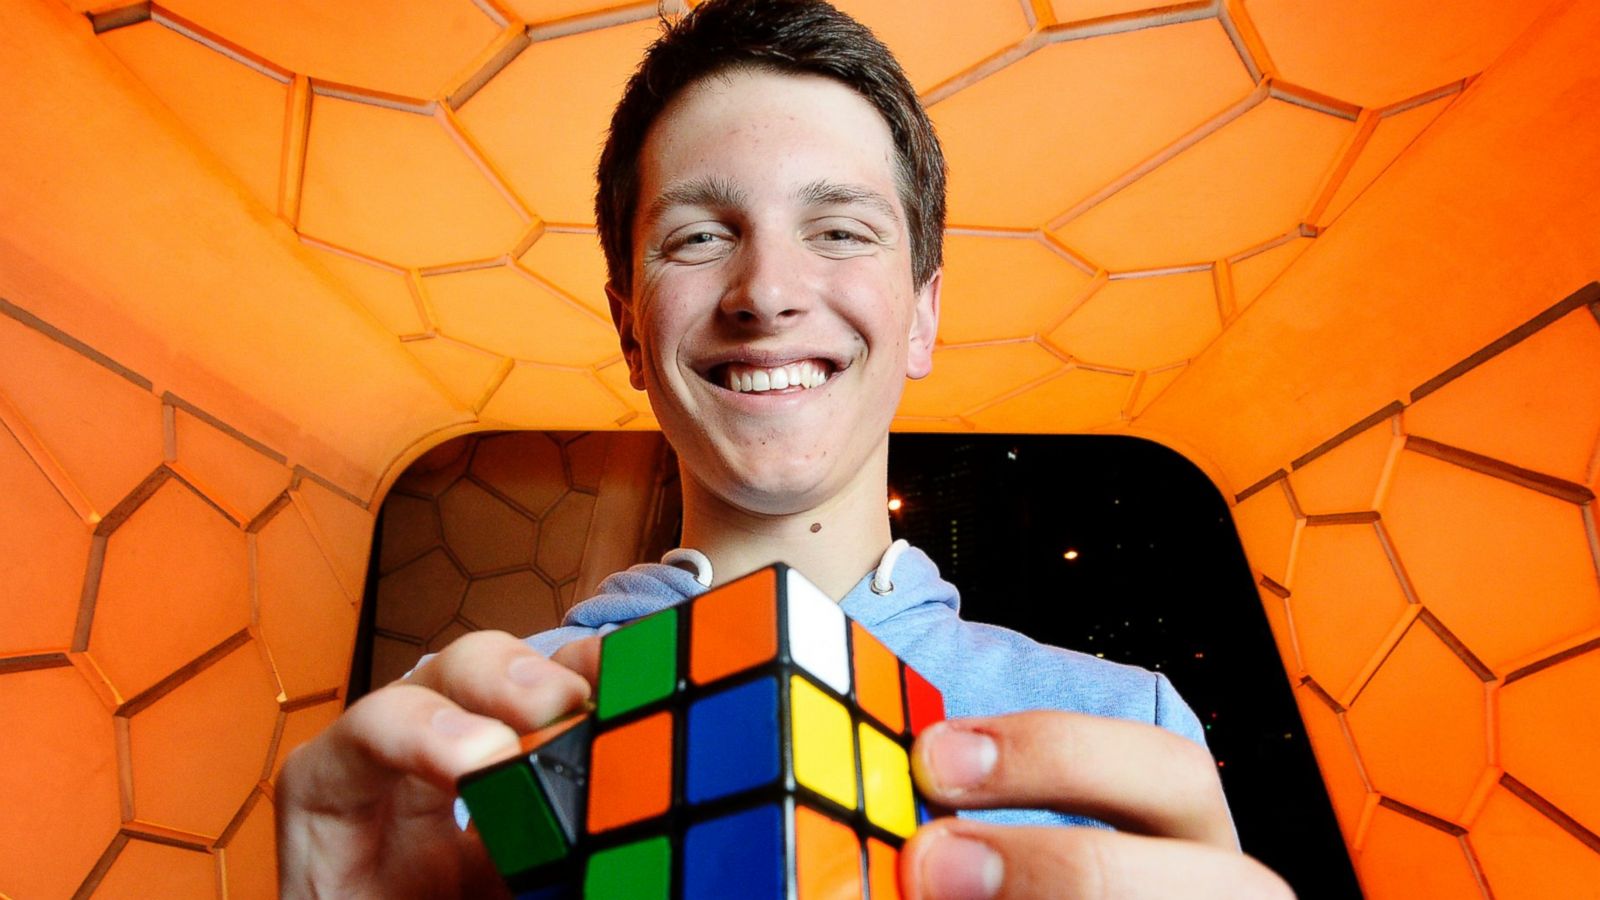 Watch Rubik's Cube Solve in Less Than 6 - ABC